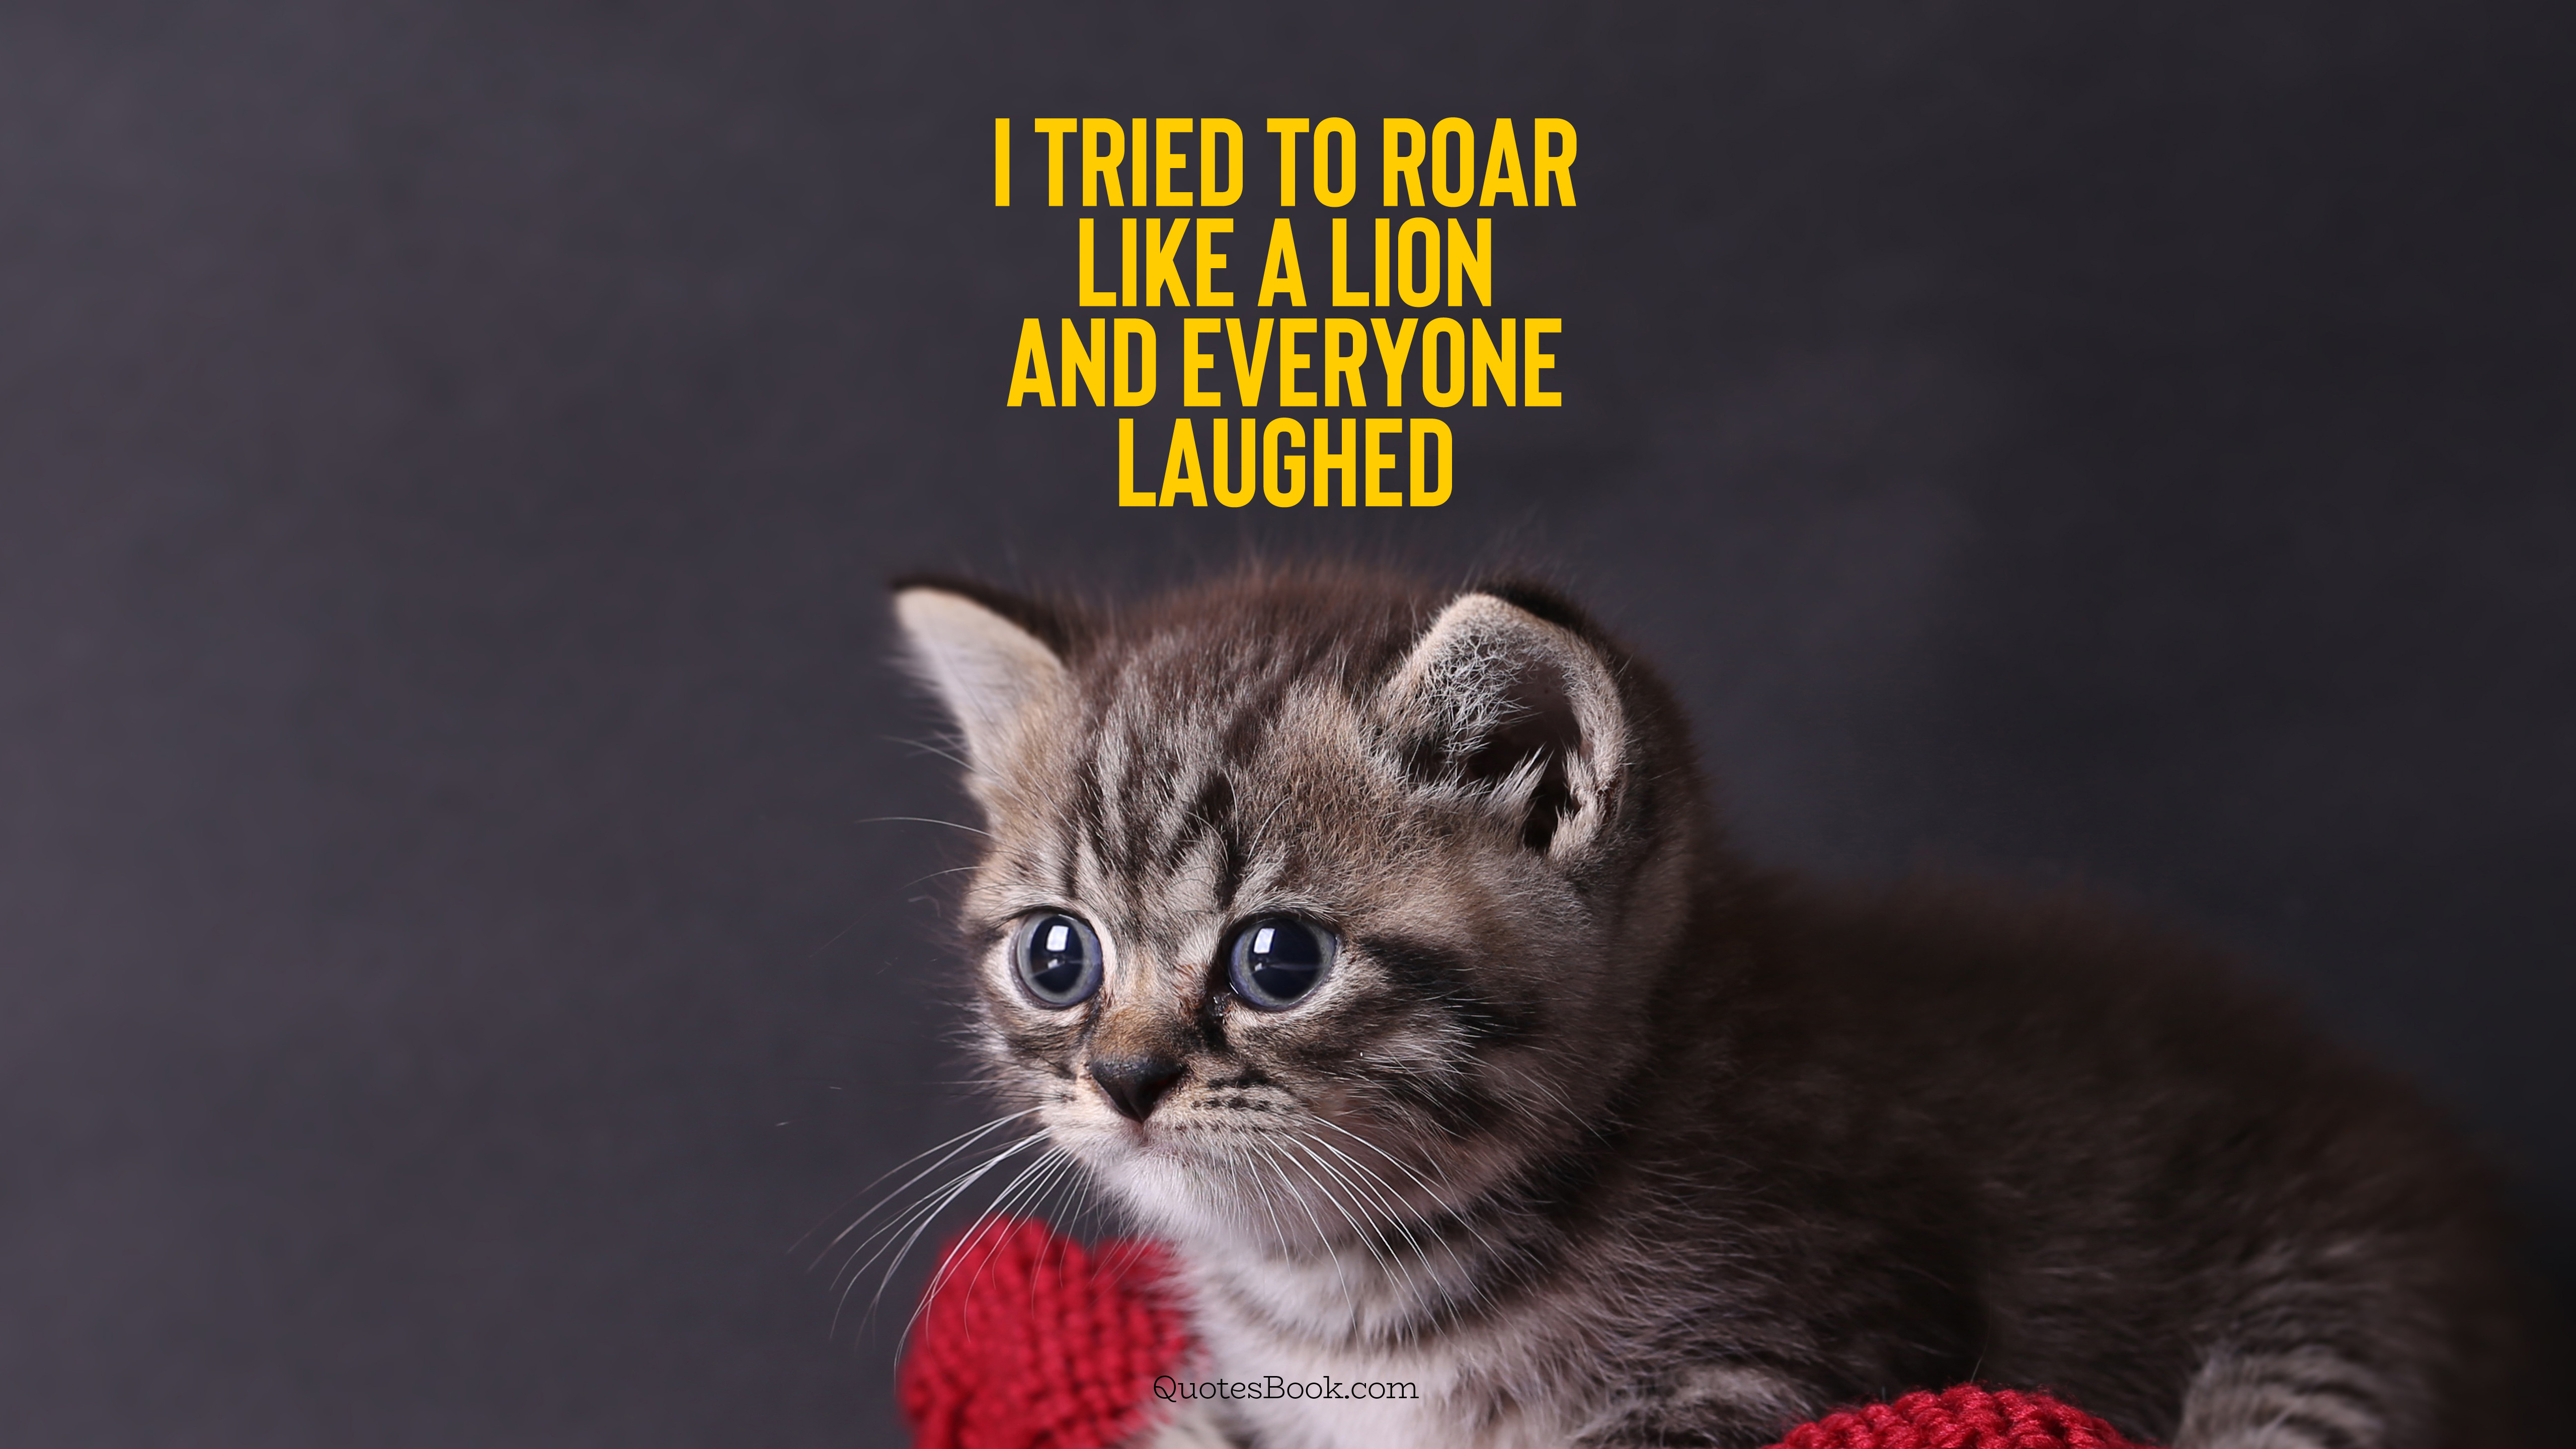 I tried to roar like a lion and everyone laughed - QuotesBook